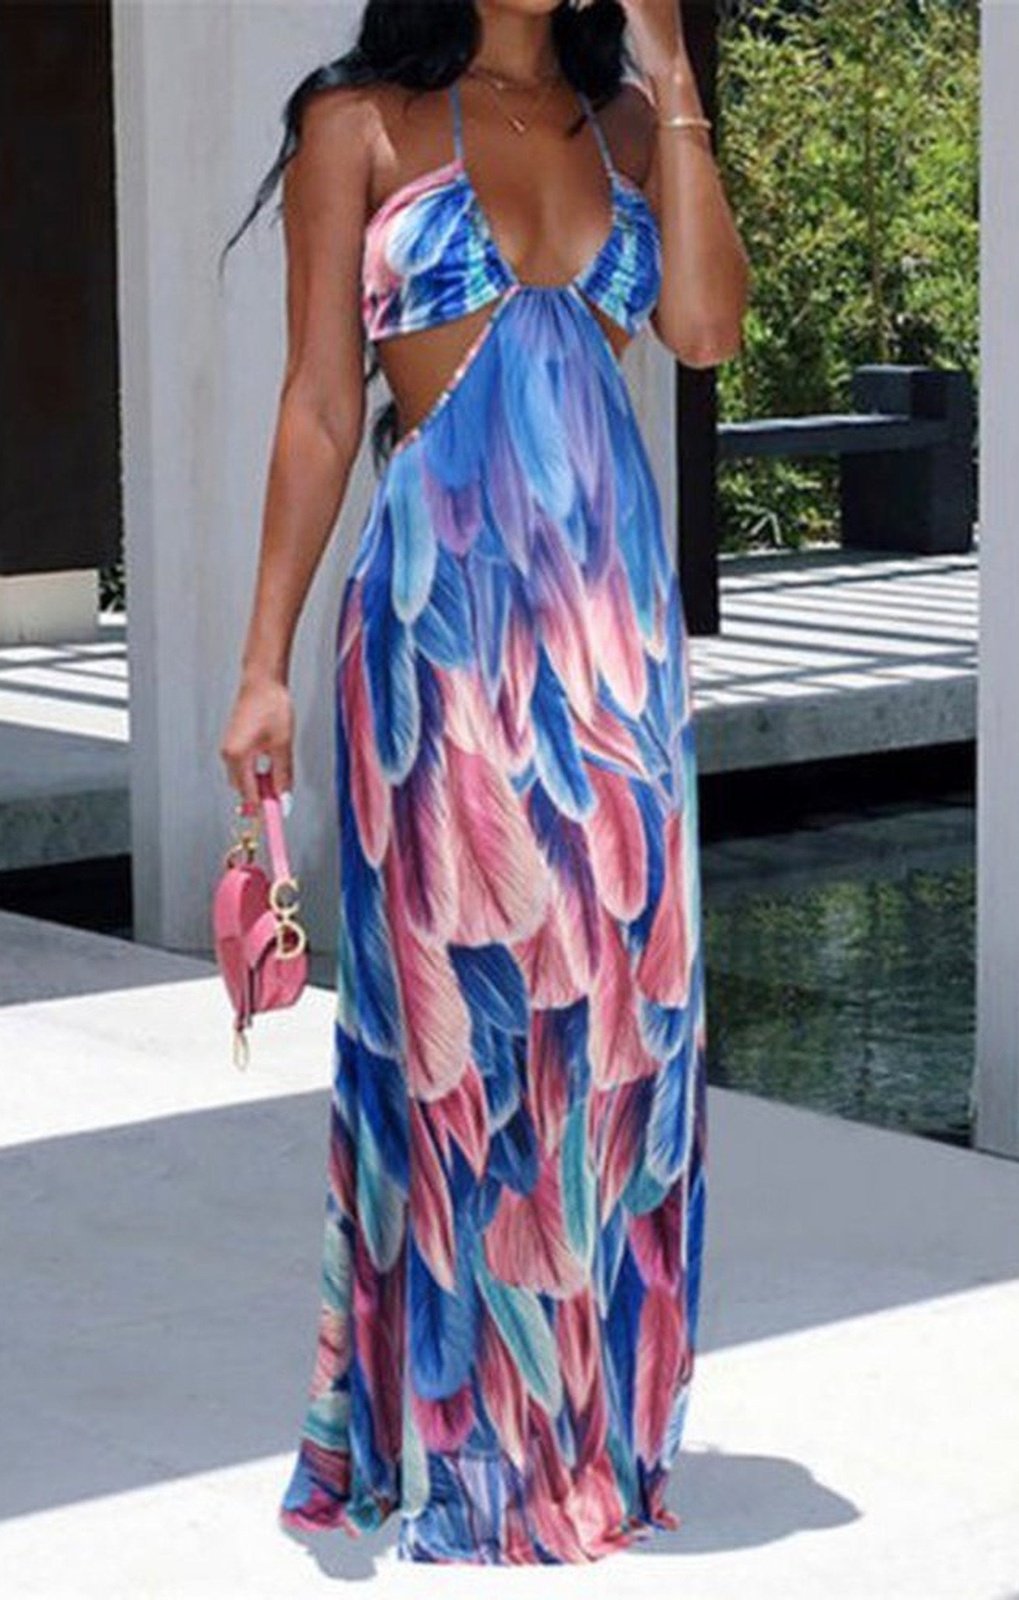 Summer printed halter neck cut out sexy maxi dress (MANY COLORS)